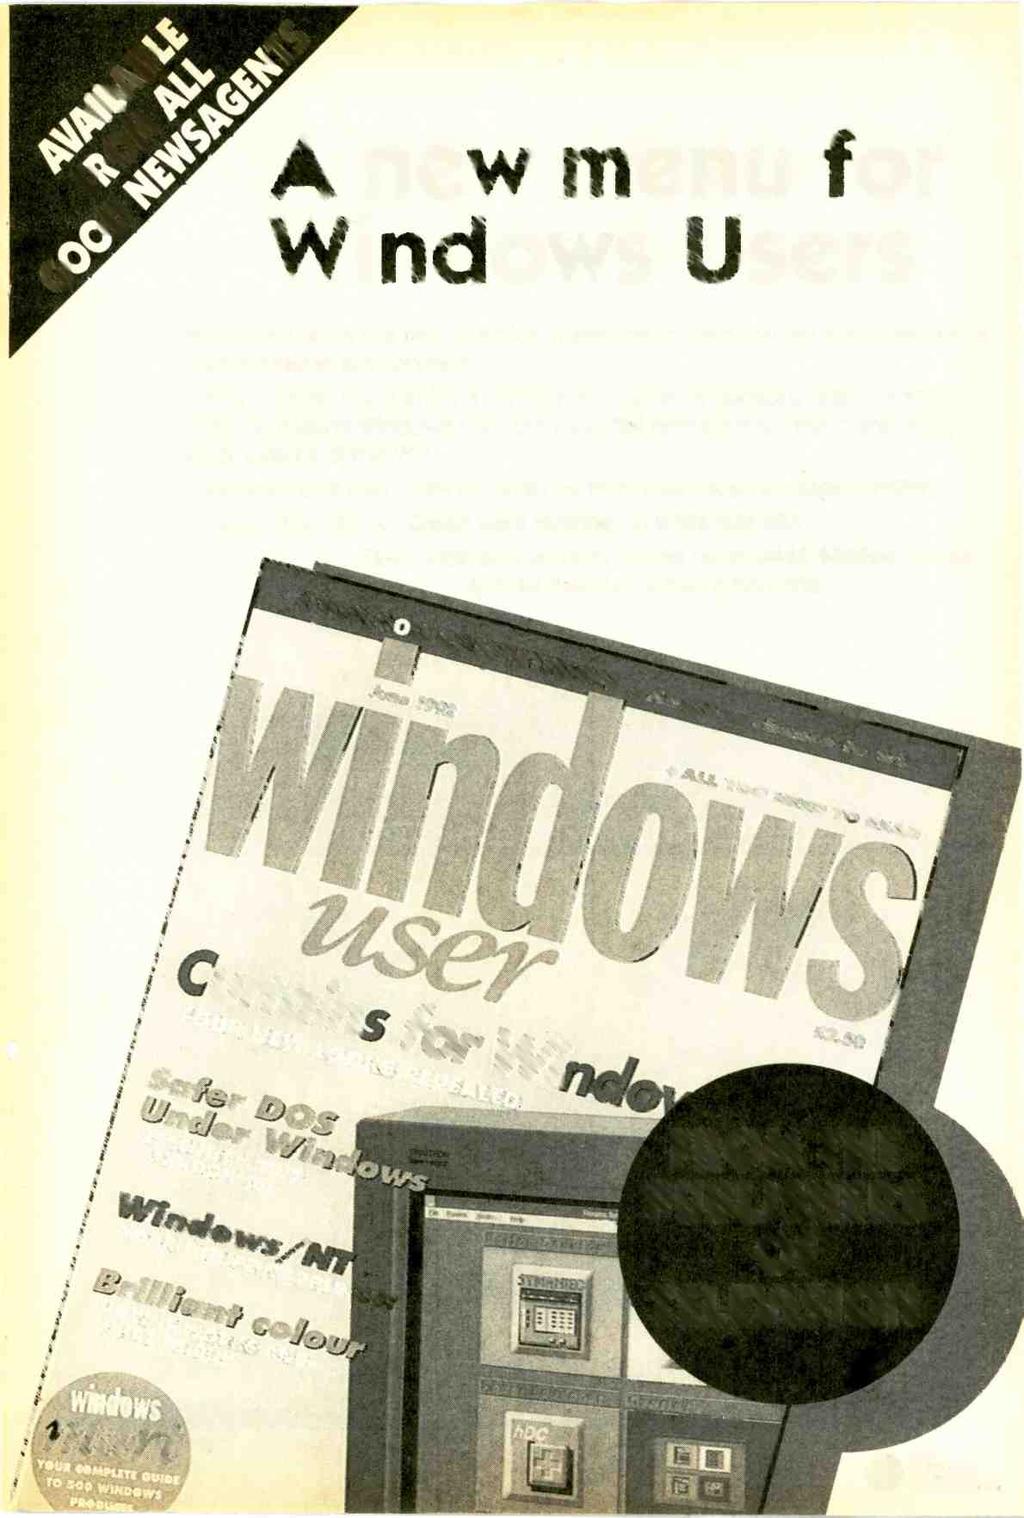 A new menu for Windows Users Windows User is the new practical magazine to help you get